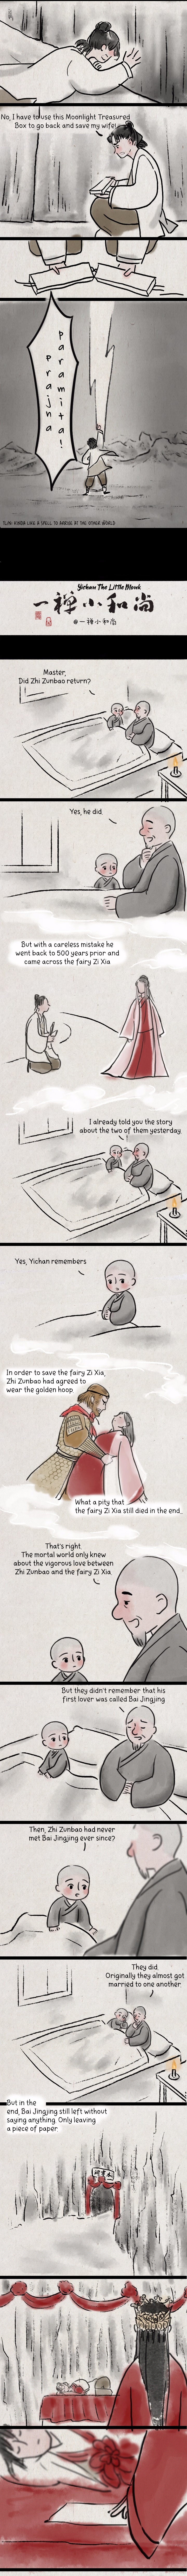 Yichan: The Little Monk - Page 2